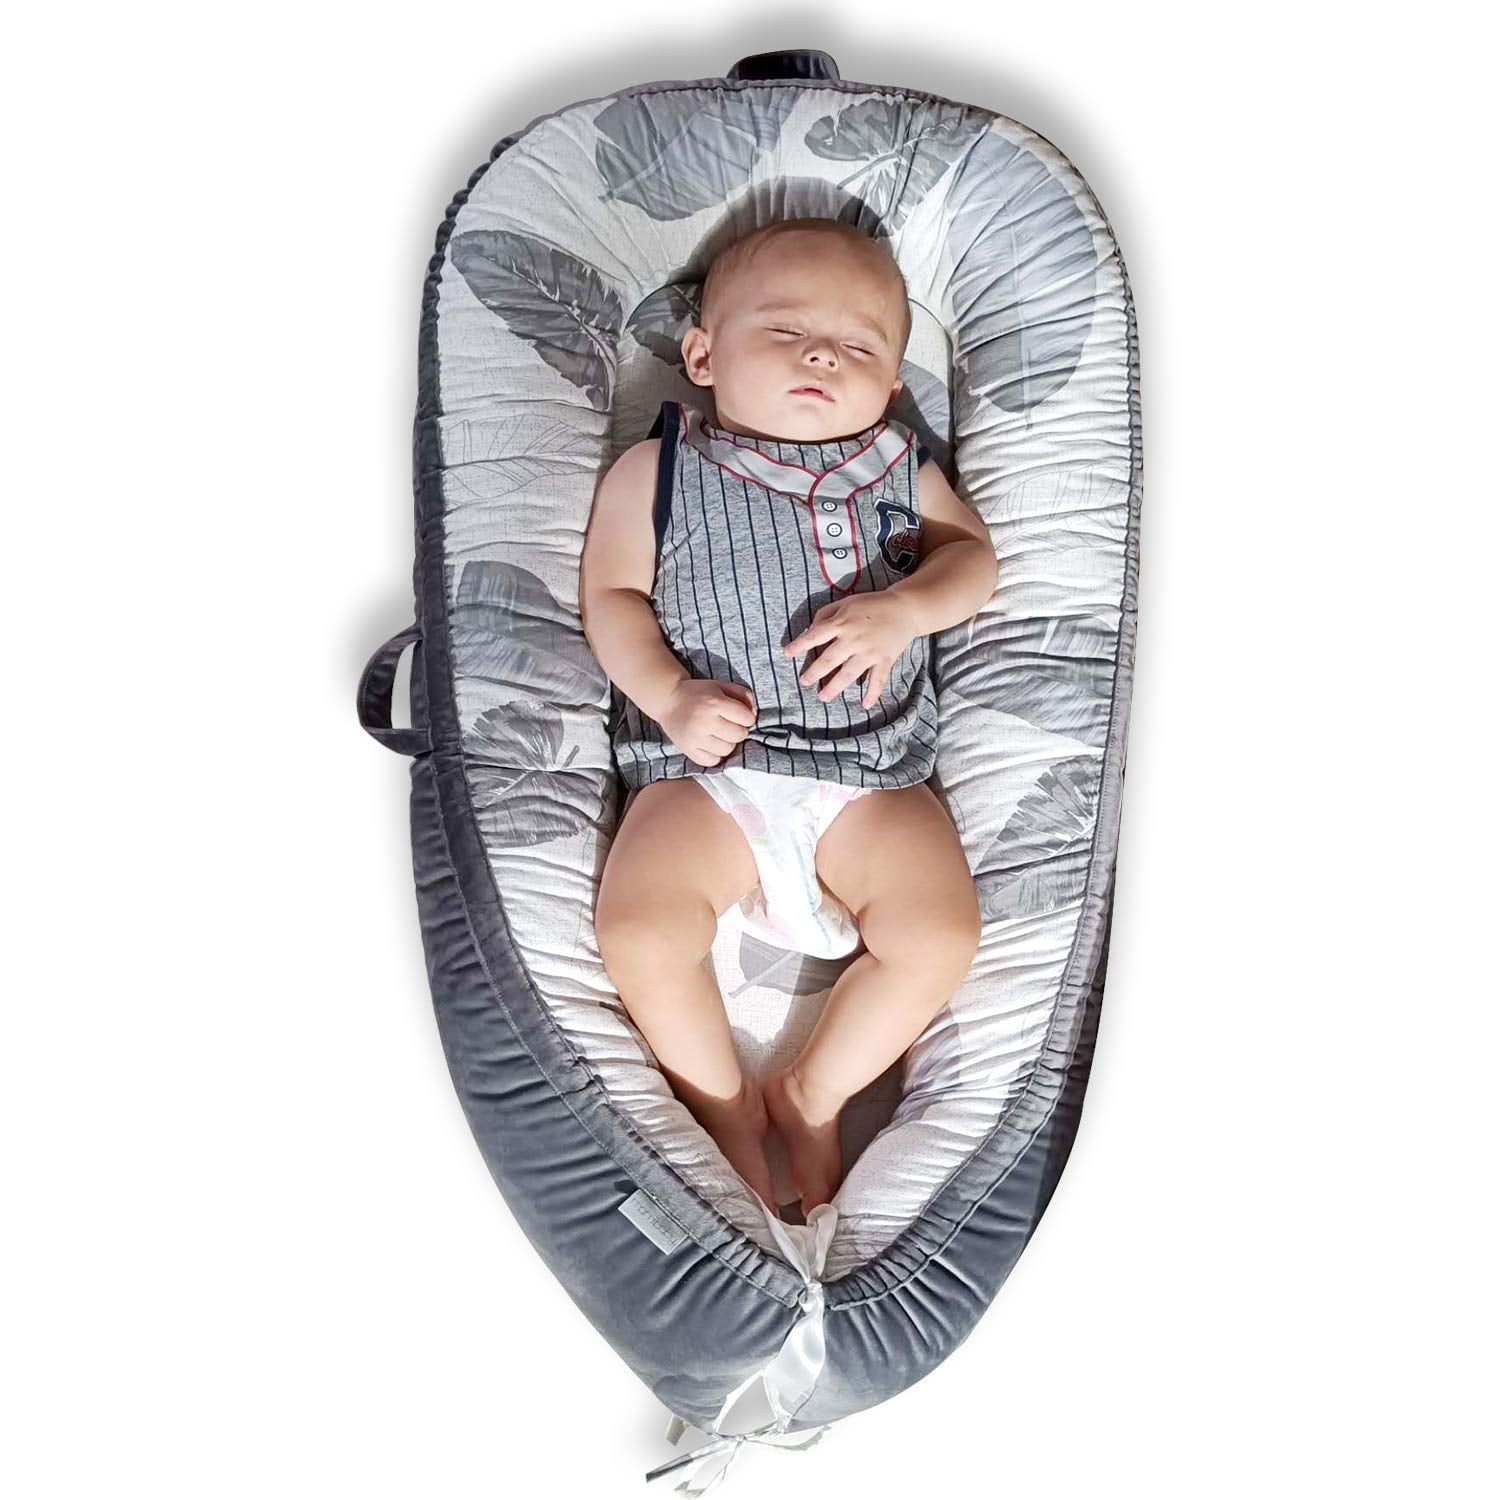 Newborn Baby Nest,Baby Bionic Bed Baby Lounger Soft Cotton Portable Breathable Newborn Infant Bassinet Removable and Washable Children Bed Co-Sleeping Bedroom/Travel/Camping